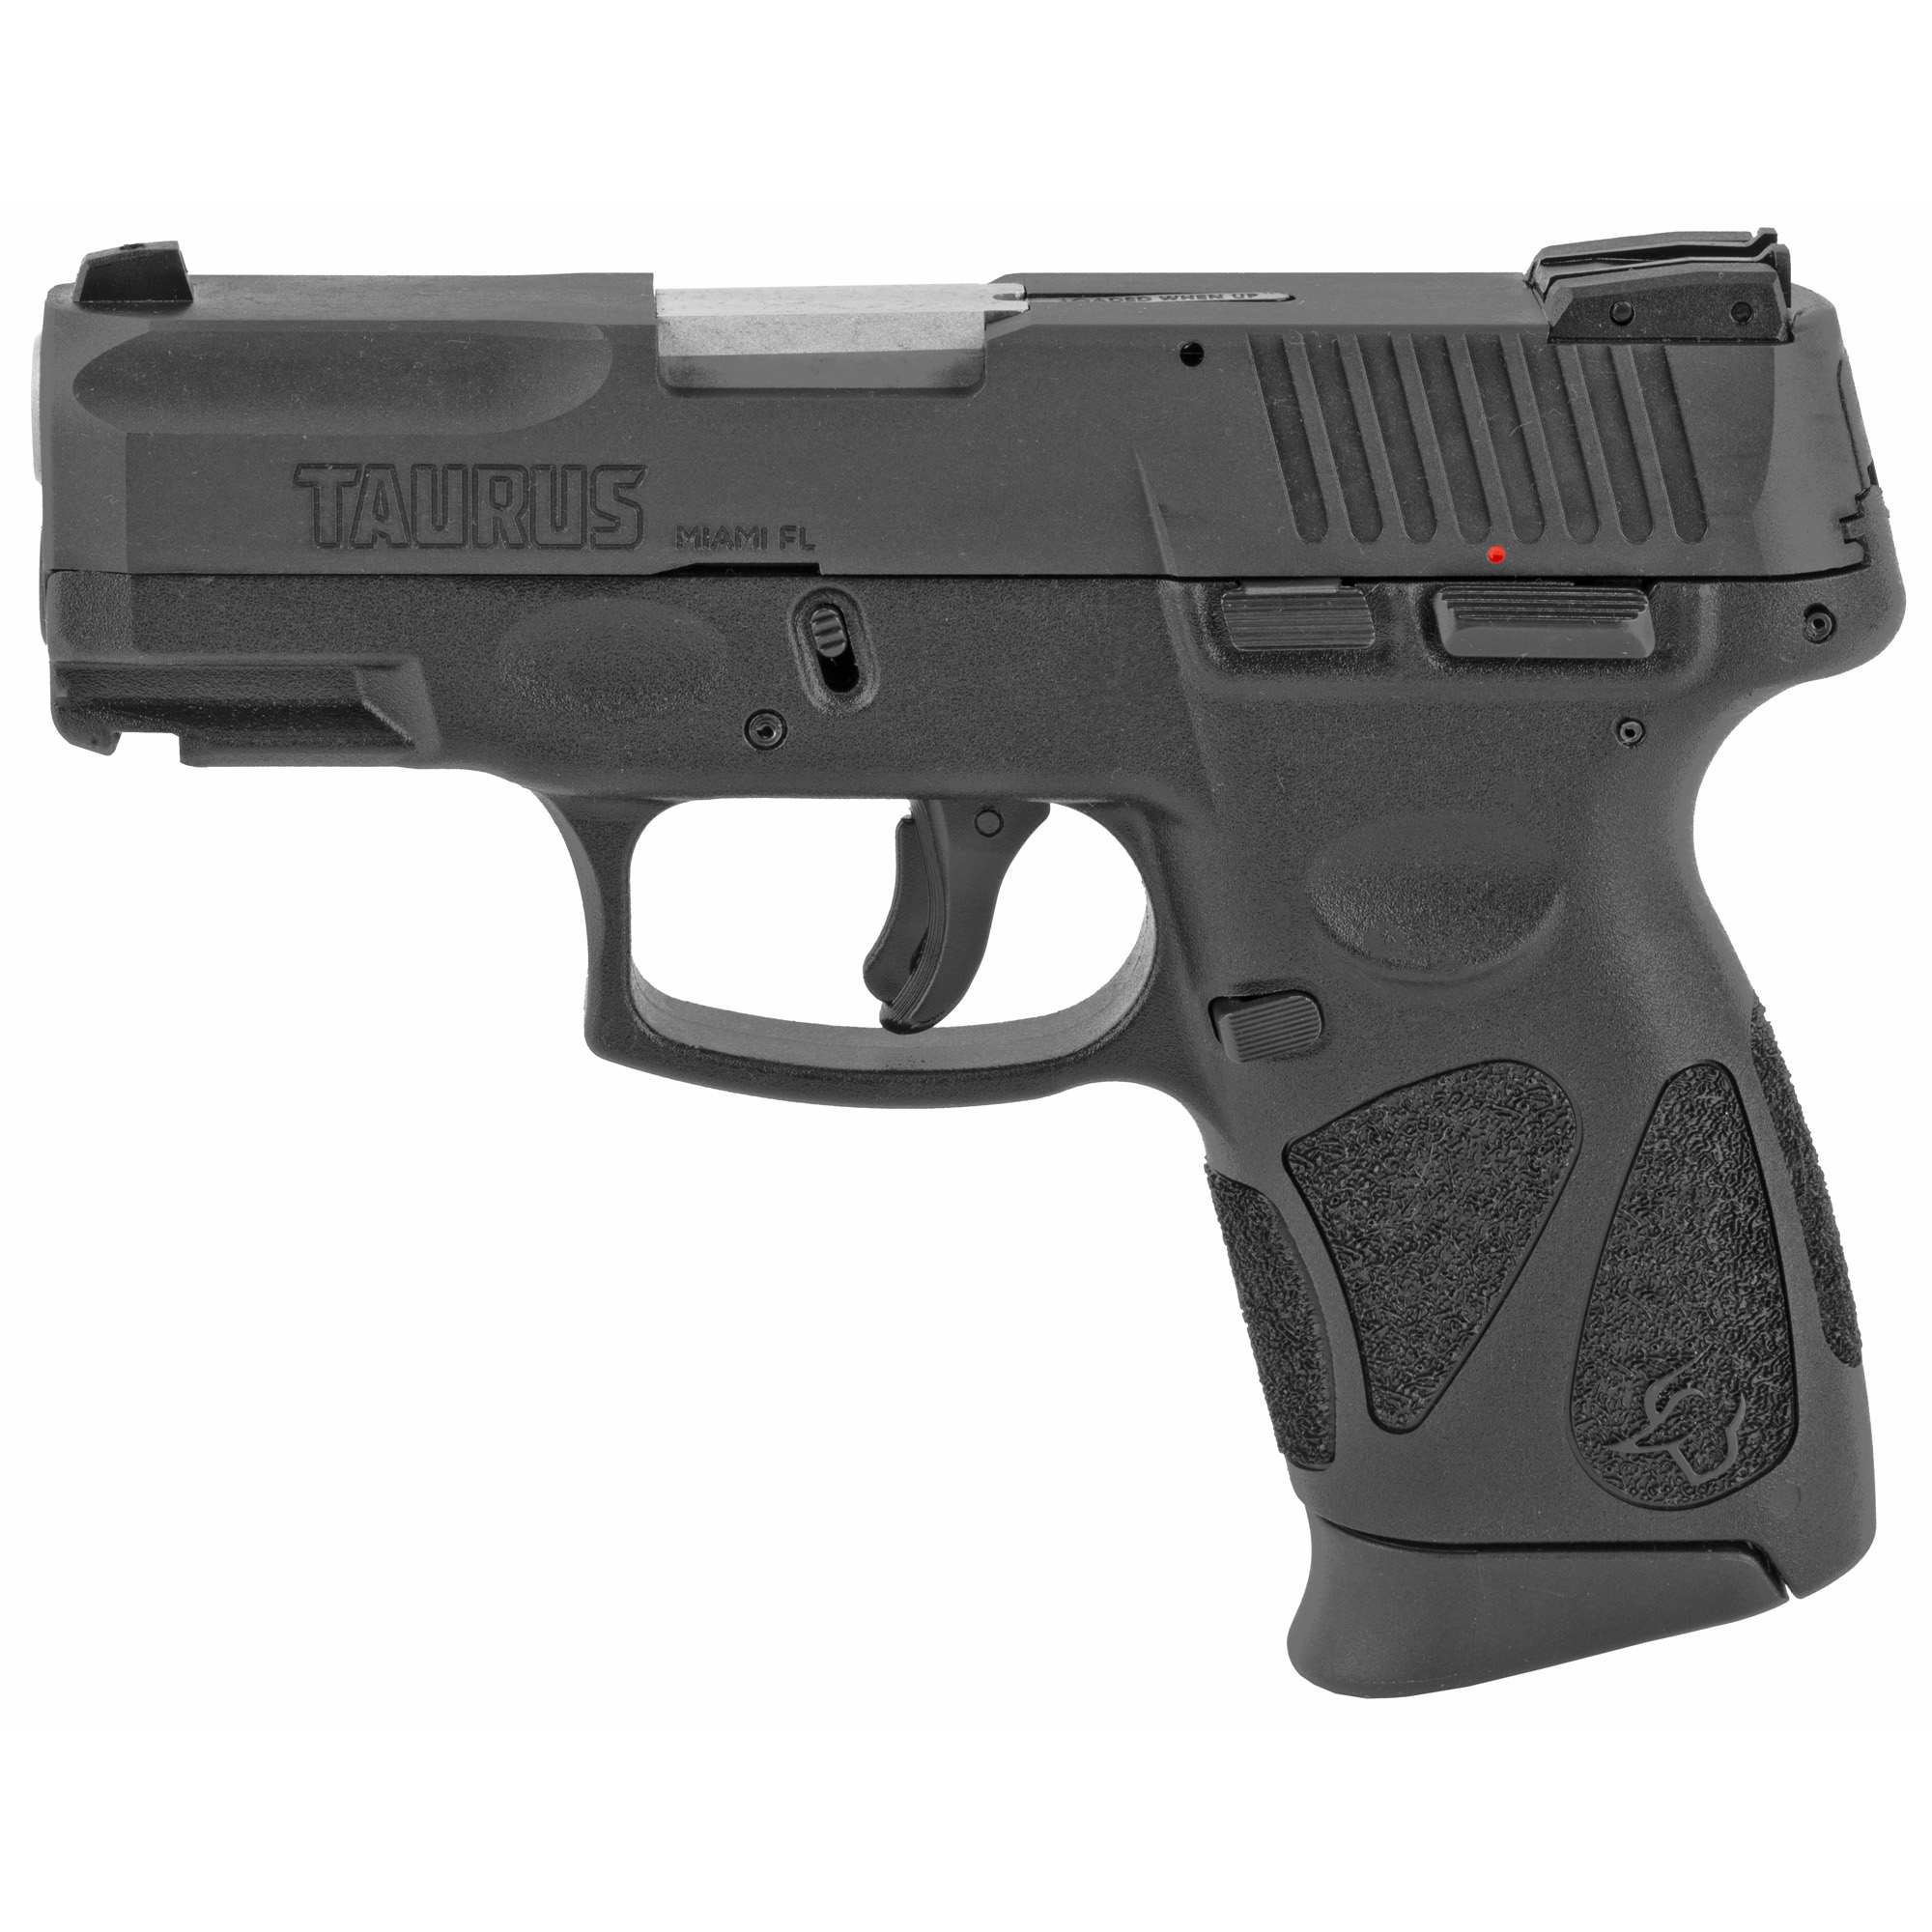 Taurus, G2C, Striker Fired, Semi-automatic, Polymer Frame Pistol, Compact , 9MM, 3.2" Barrel, Matte Finish, Black, Adjustable Sights, Manual Thumb Safety, 12 Rounds, 2 Magazines